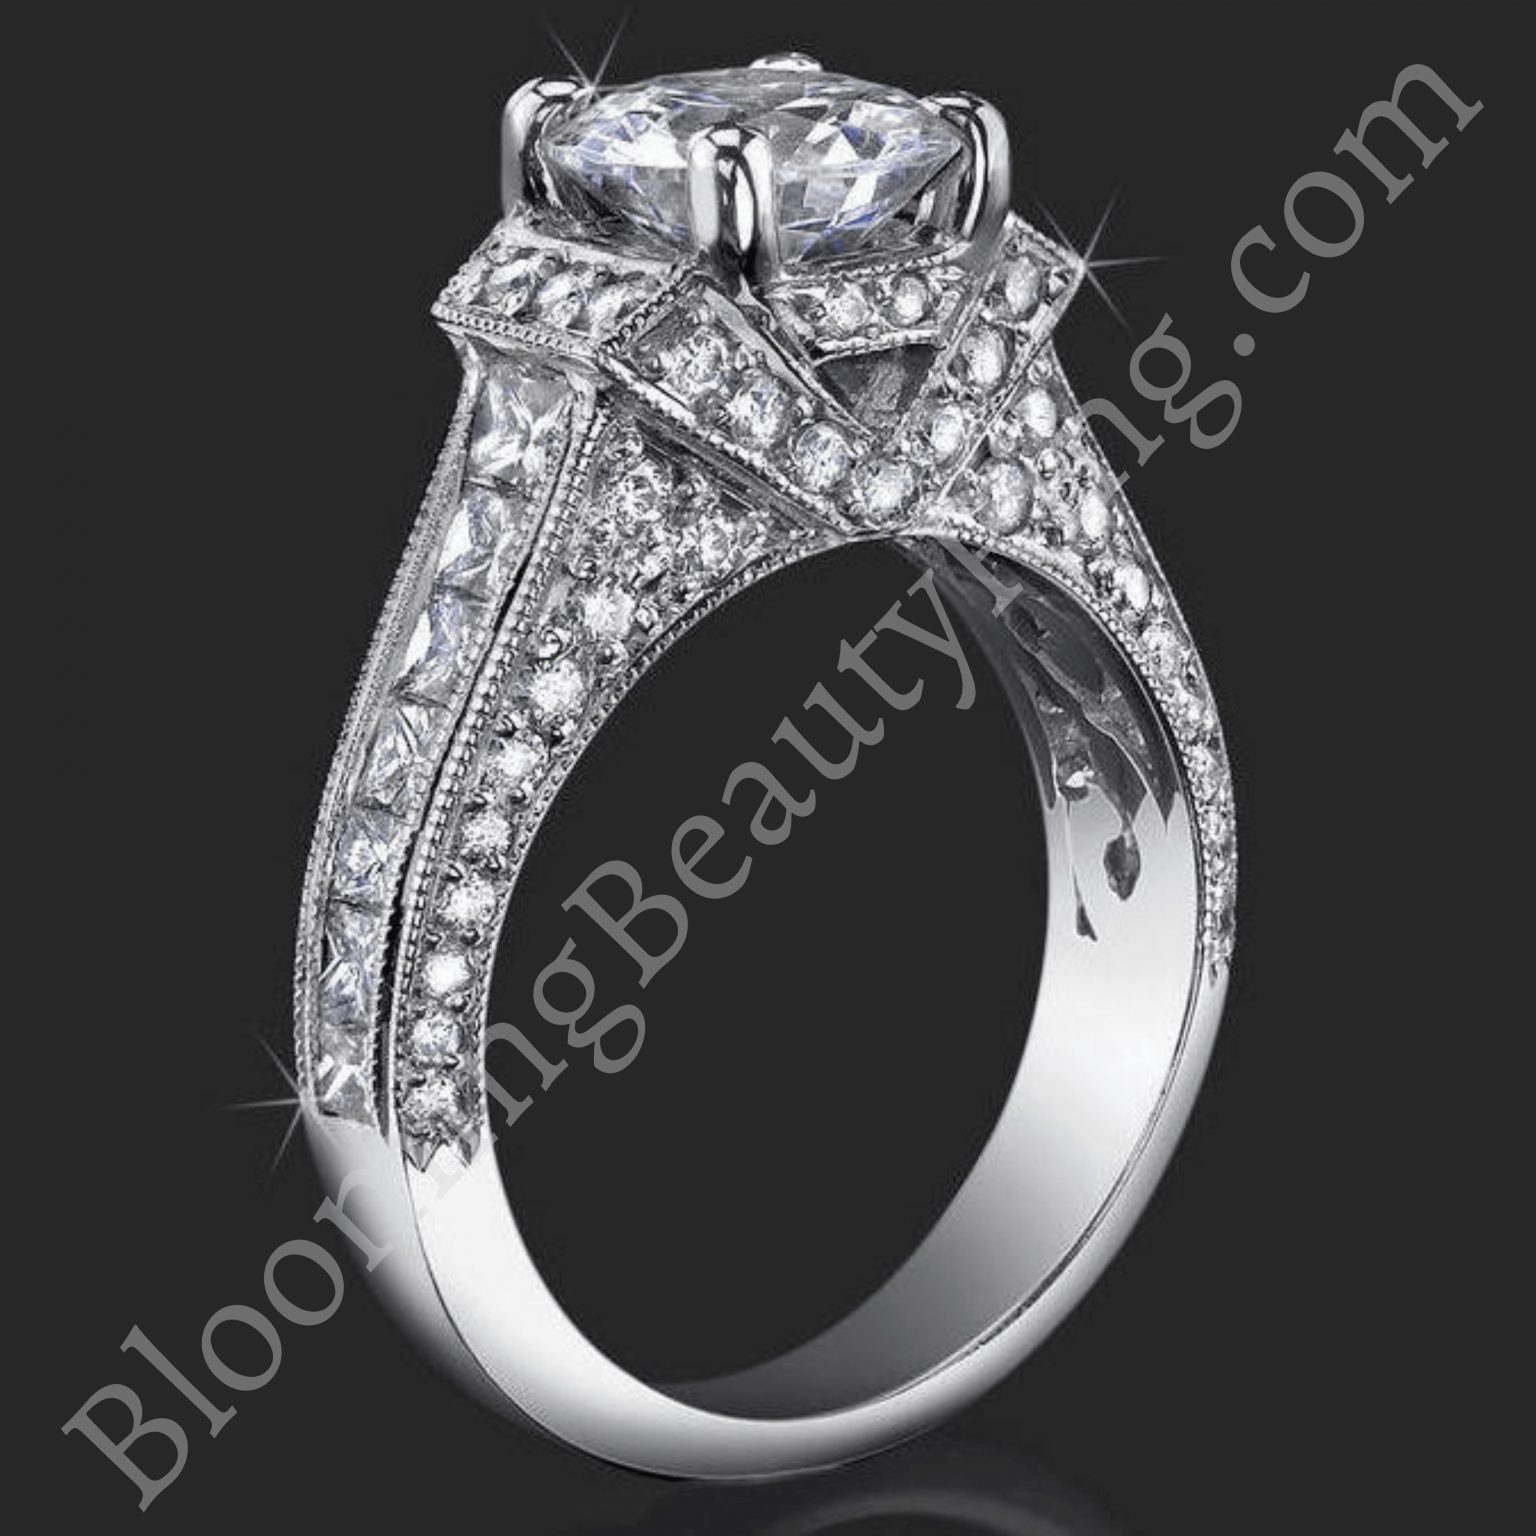 Fit for a Queen Engagement Ring Showcasing Nearly 2 Carats of Scintillating Diamonds